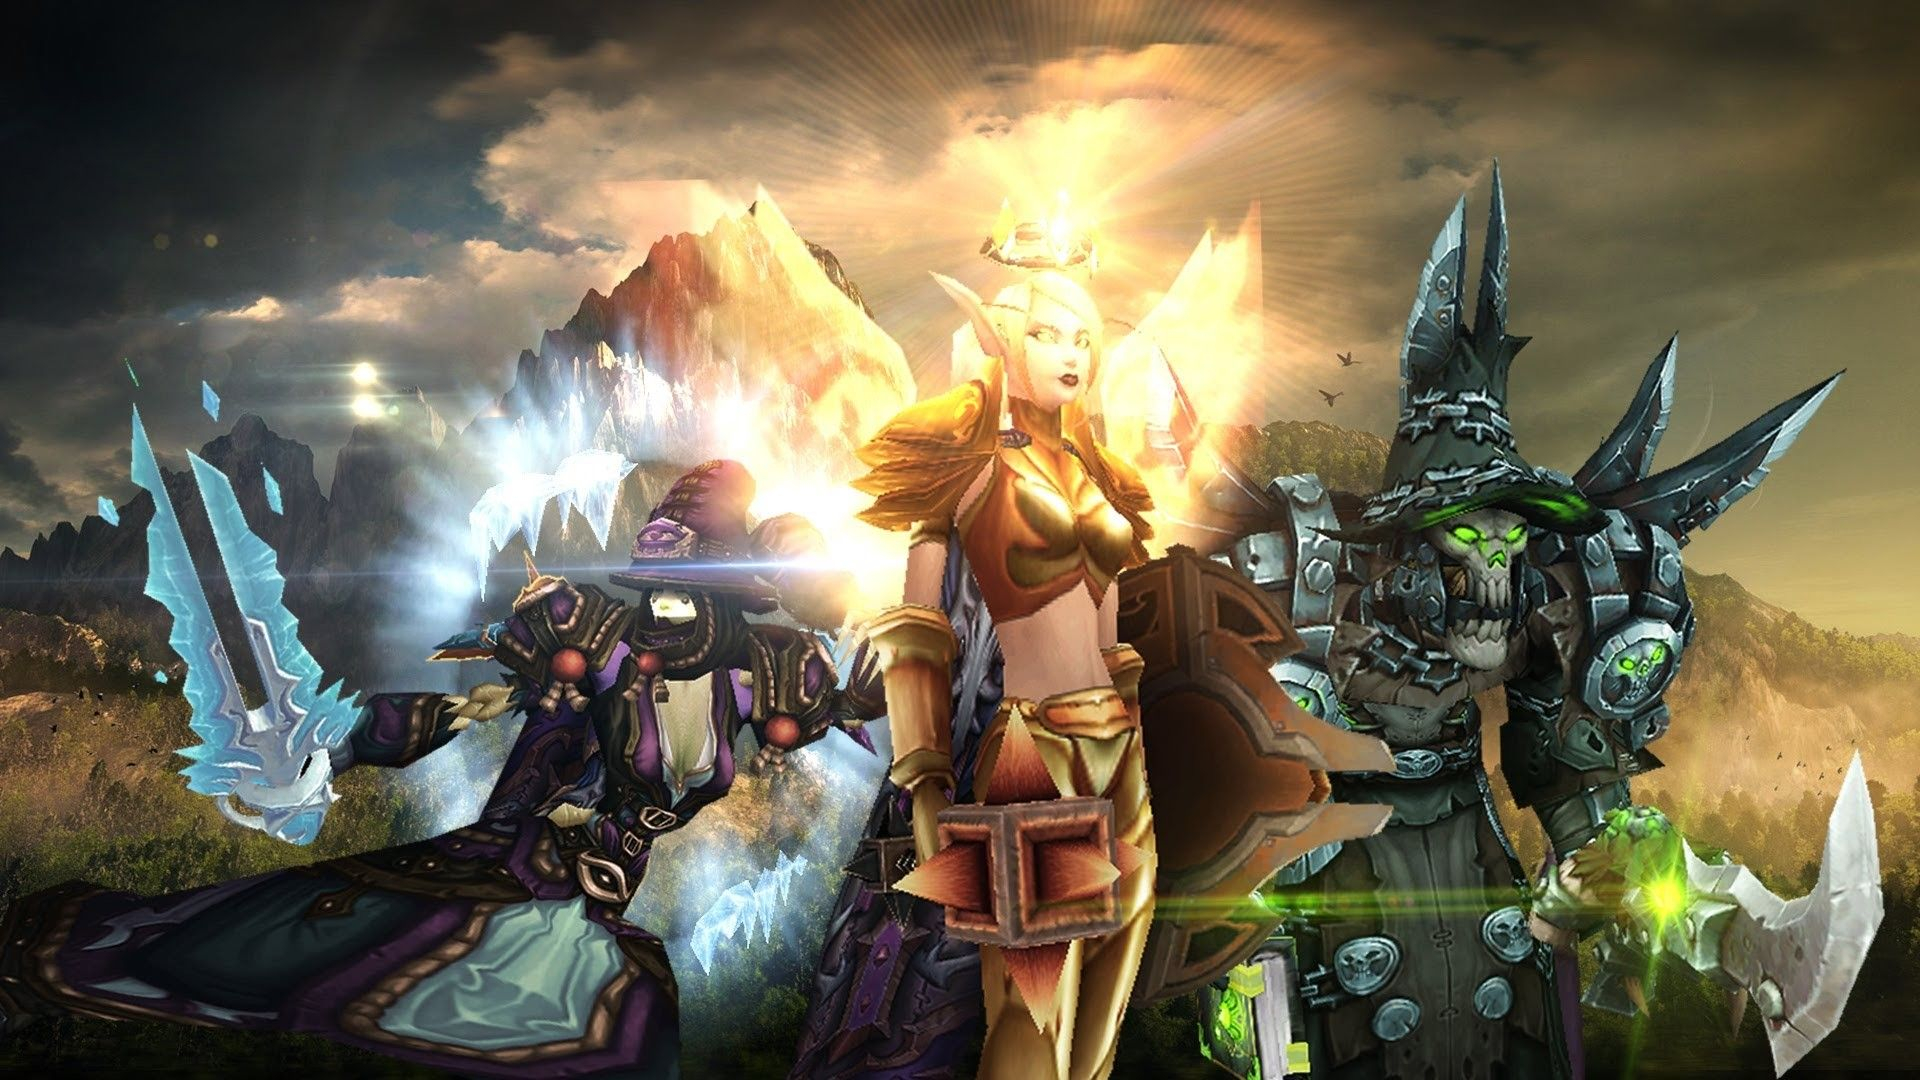 1920x1080 World of Warcraft Paladin Wallpapers Top Free World of Warcraft Paladin Backgrounds